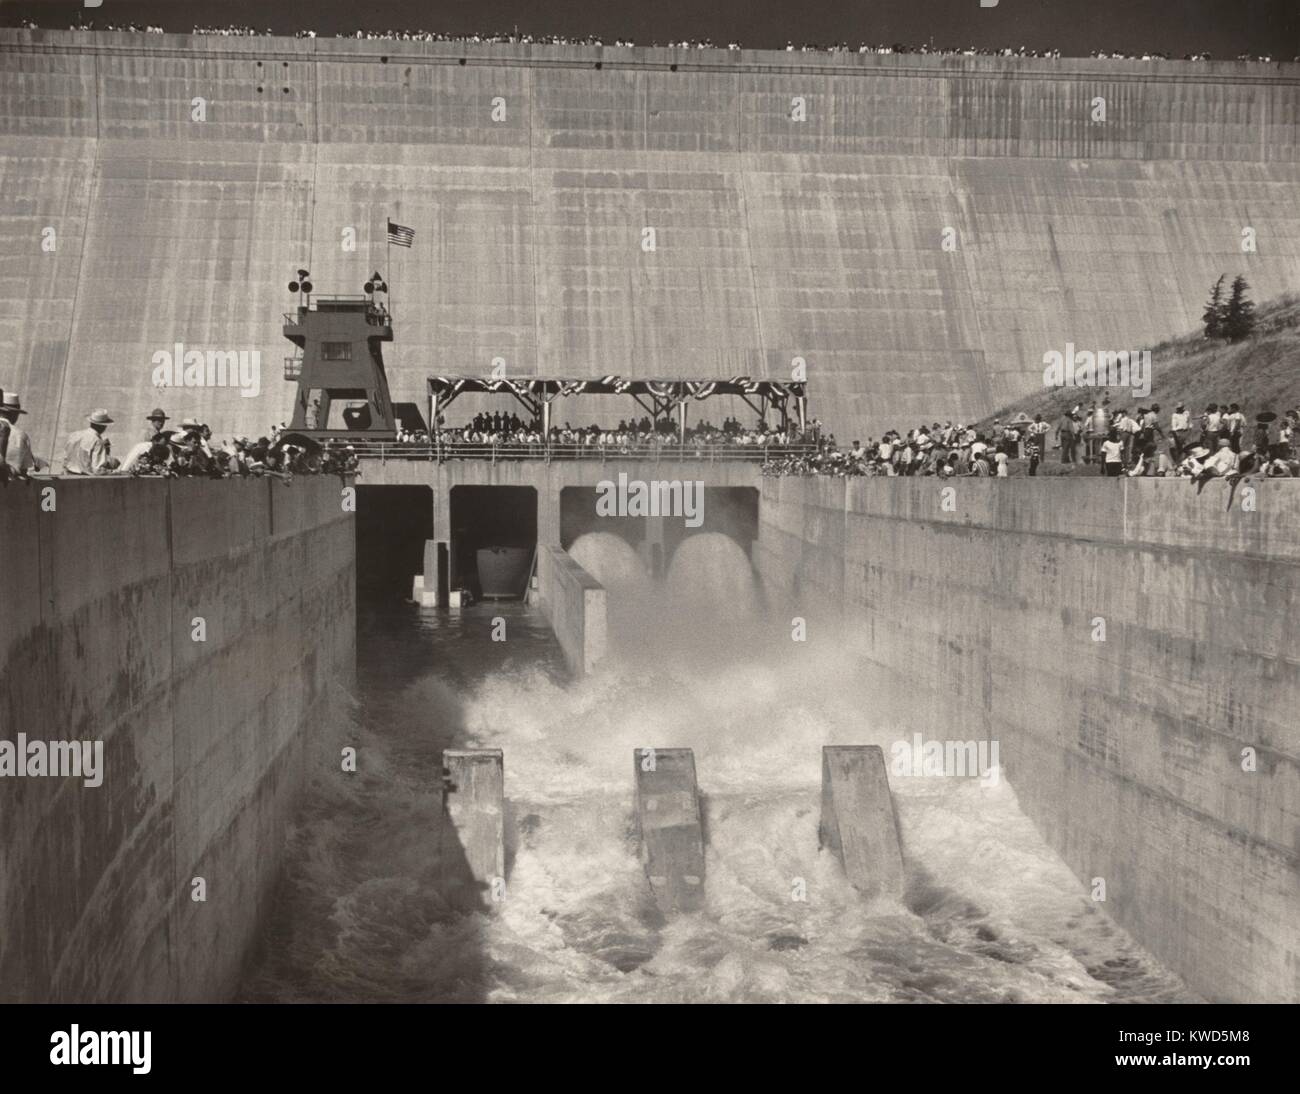 Official opening of the partially completed Friant-Kern Canal, July 9, 1949. When completed the canal would irrigate 600,000 acres of arid land in the central valley of southern California. Spectators lined on both sides and are along top of wall in the background. July 9, 1949. (BSLOC 2014 13 228) Stock Photo